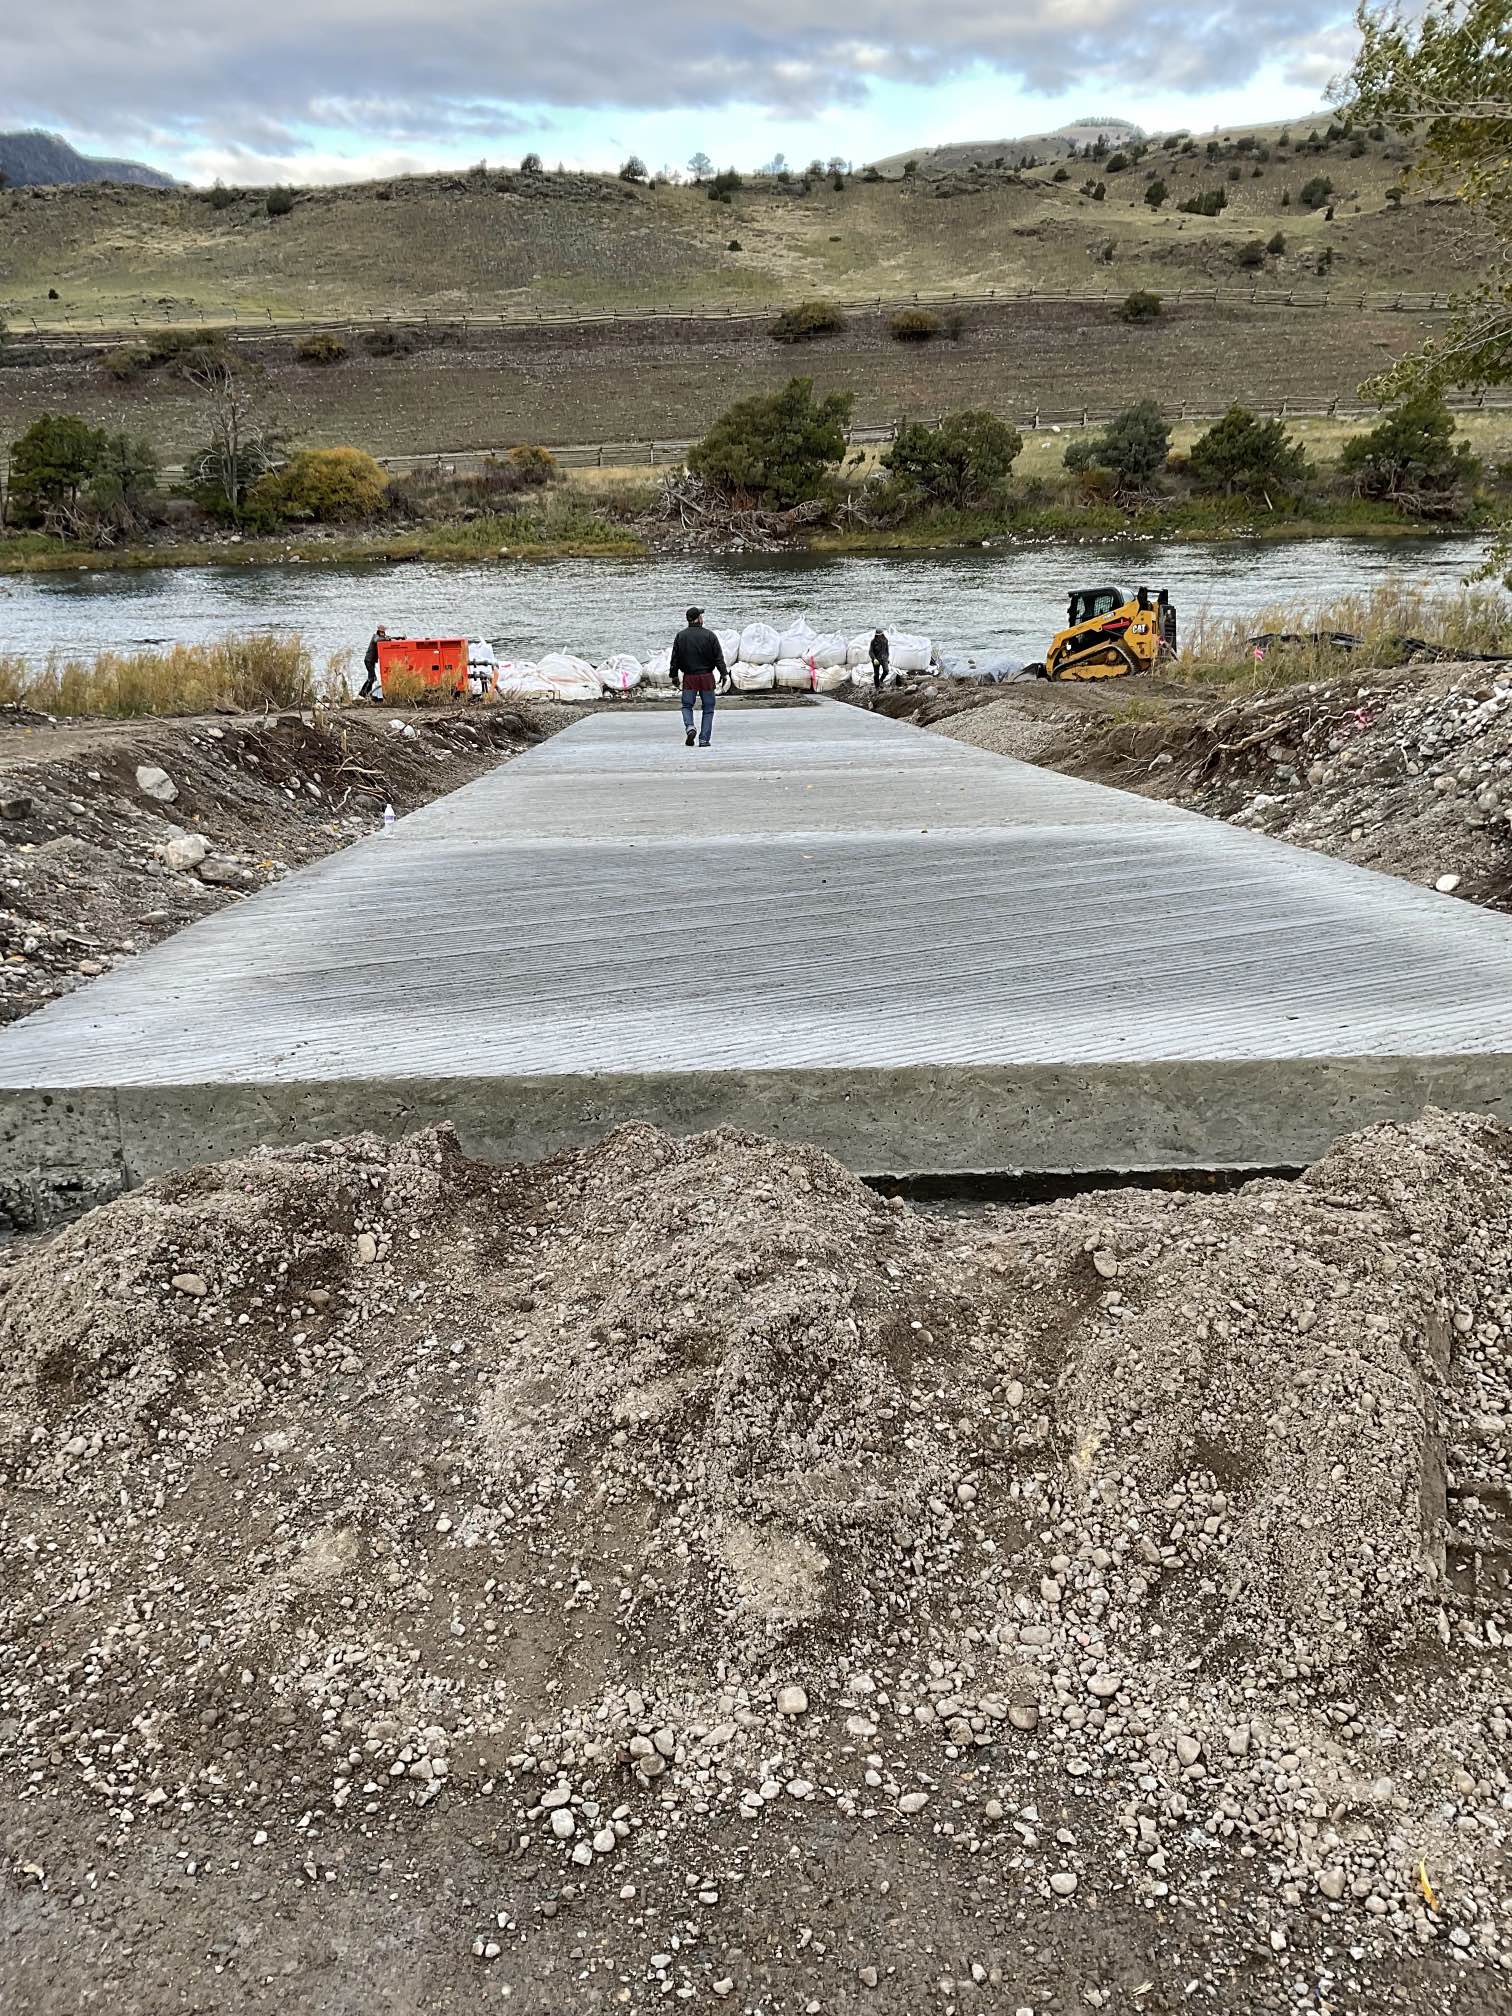 Man stands on new concrete boat launch surrounded by dirt mounds.